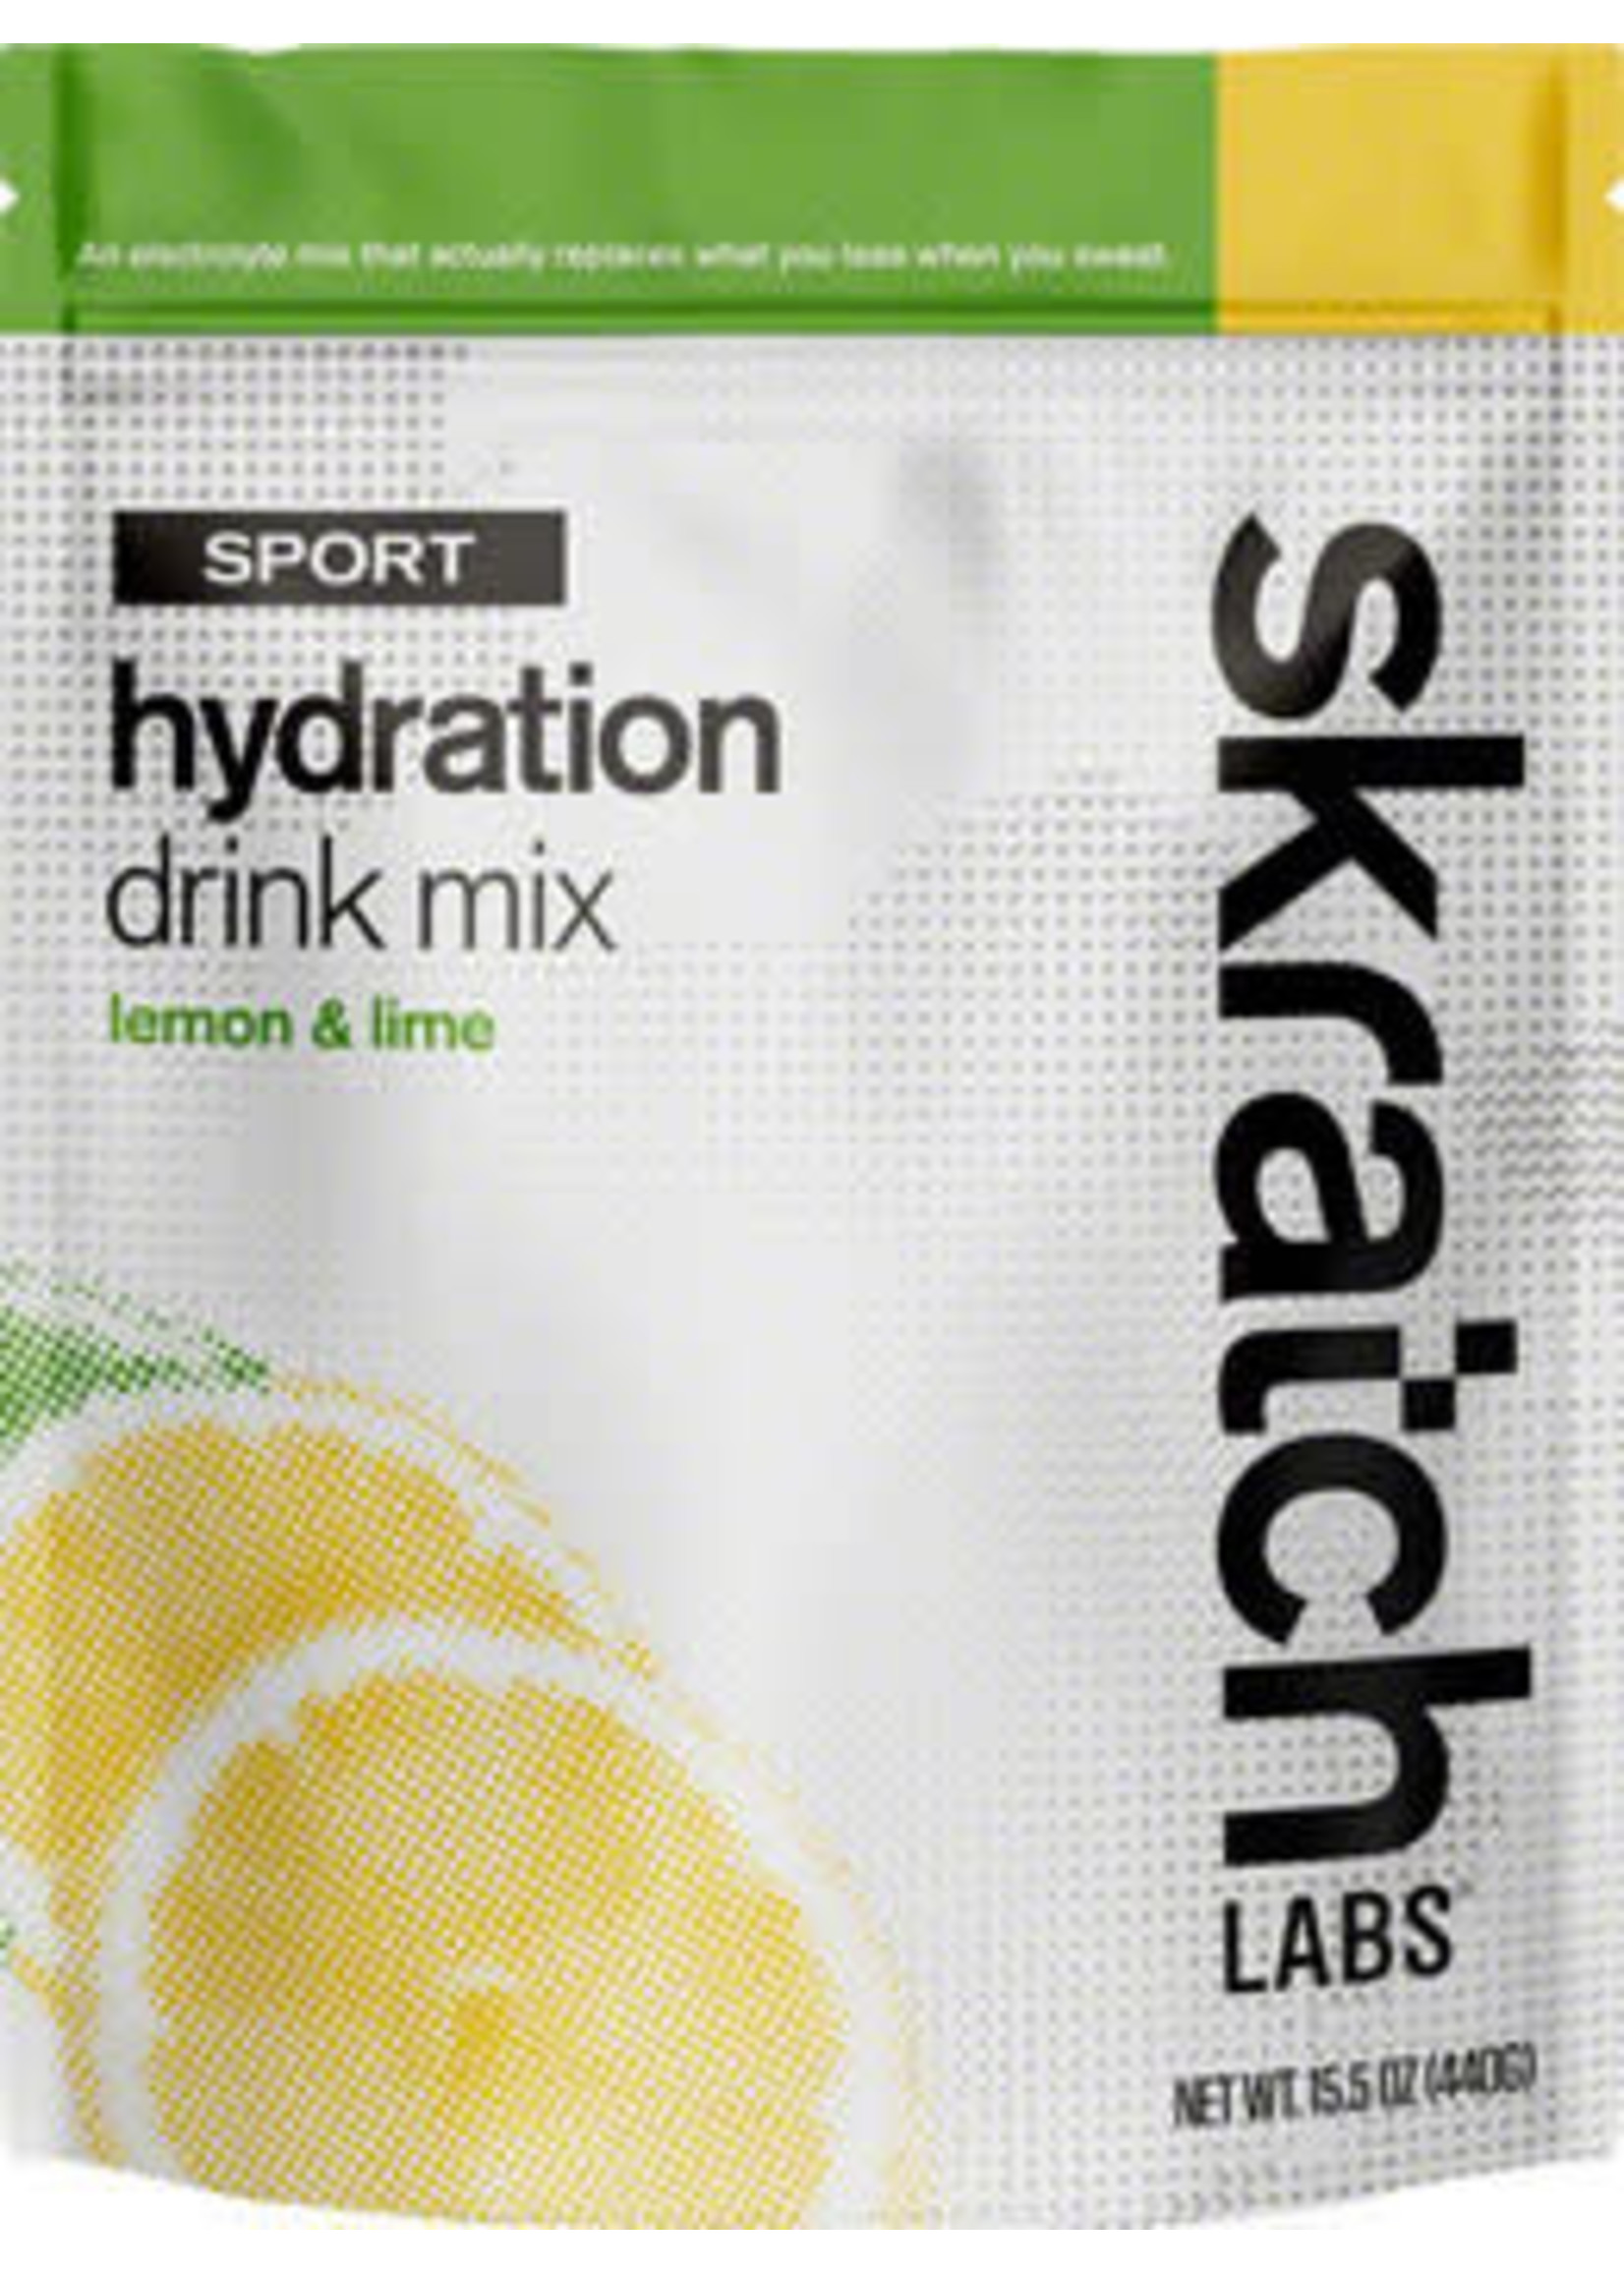 Skratch Skratch Labs Sport Hydration Drink Mix: Lemons and Limes, 20-Serving Resealable Pouch